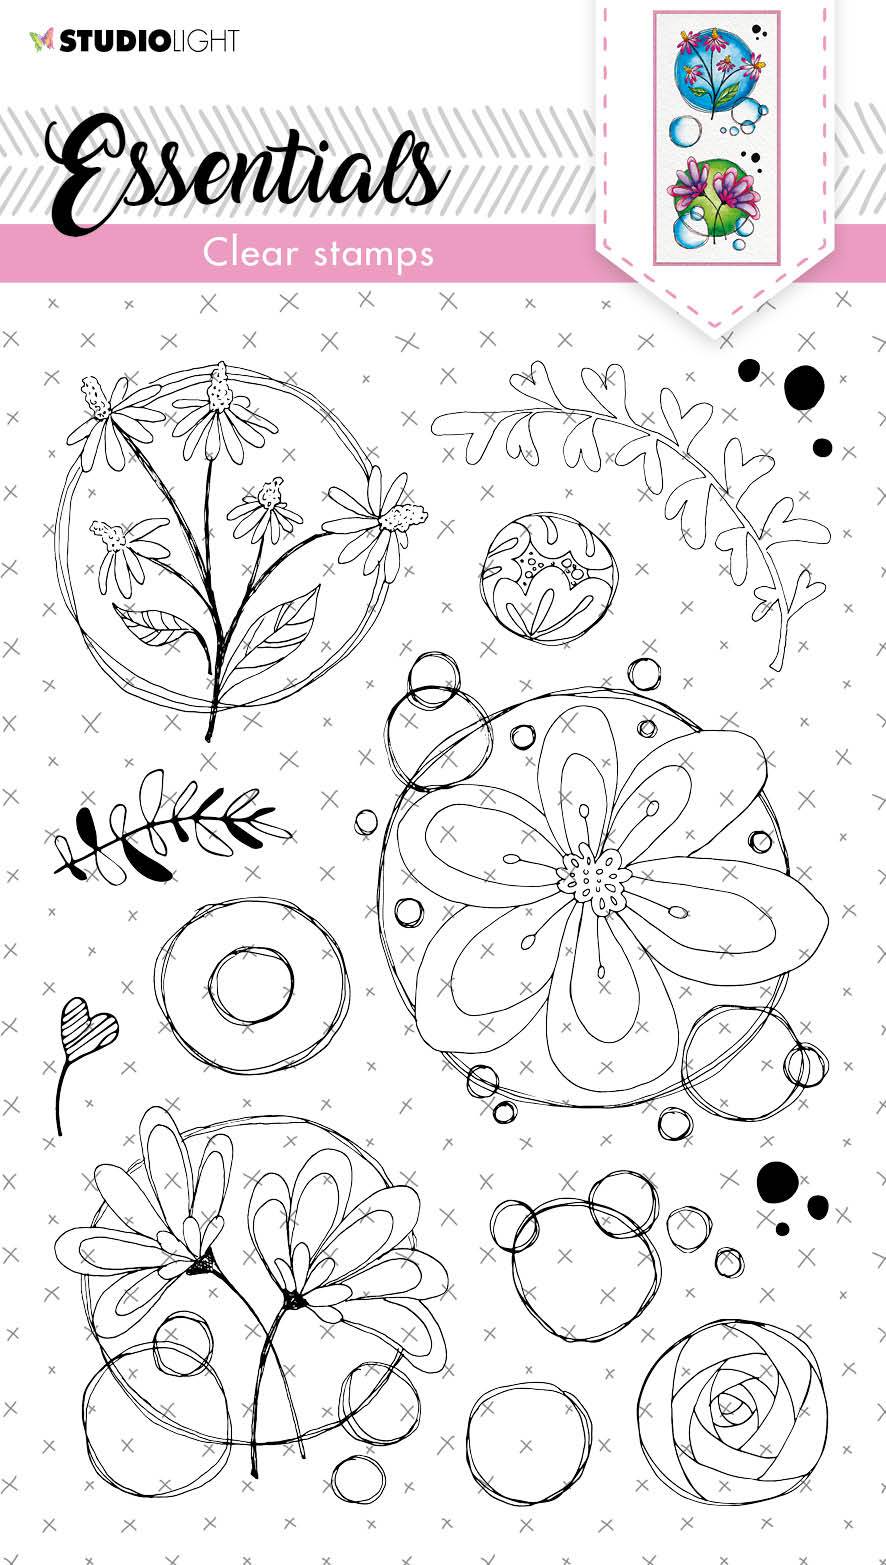 SL Clear Stamp Quirky Top Flowers Essentials 148x210x3mm 1 pc nr.118